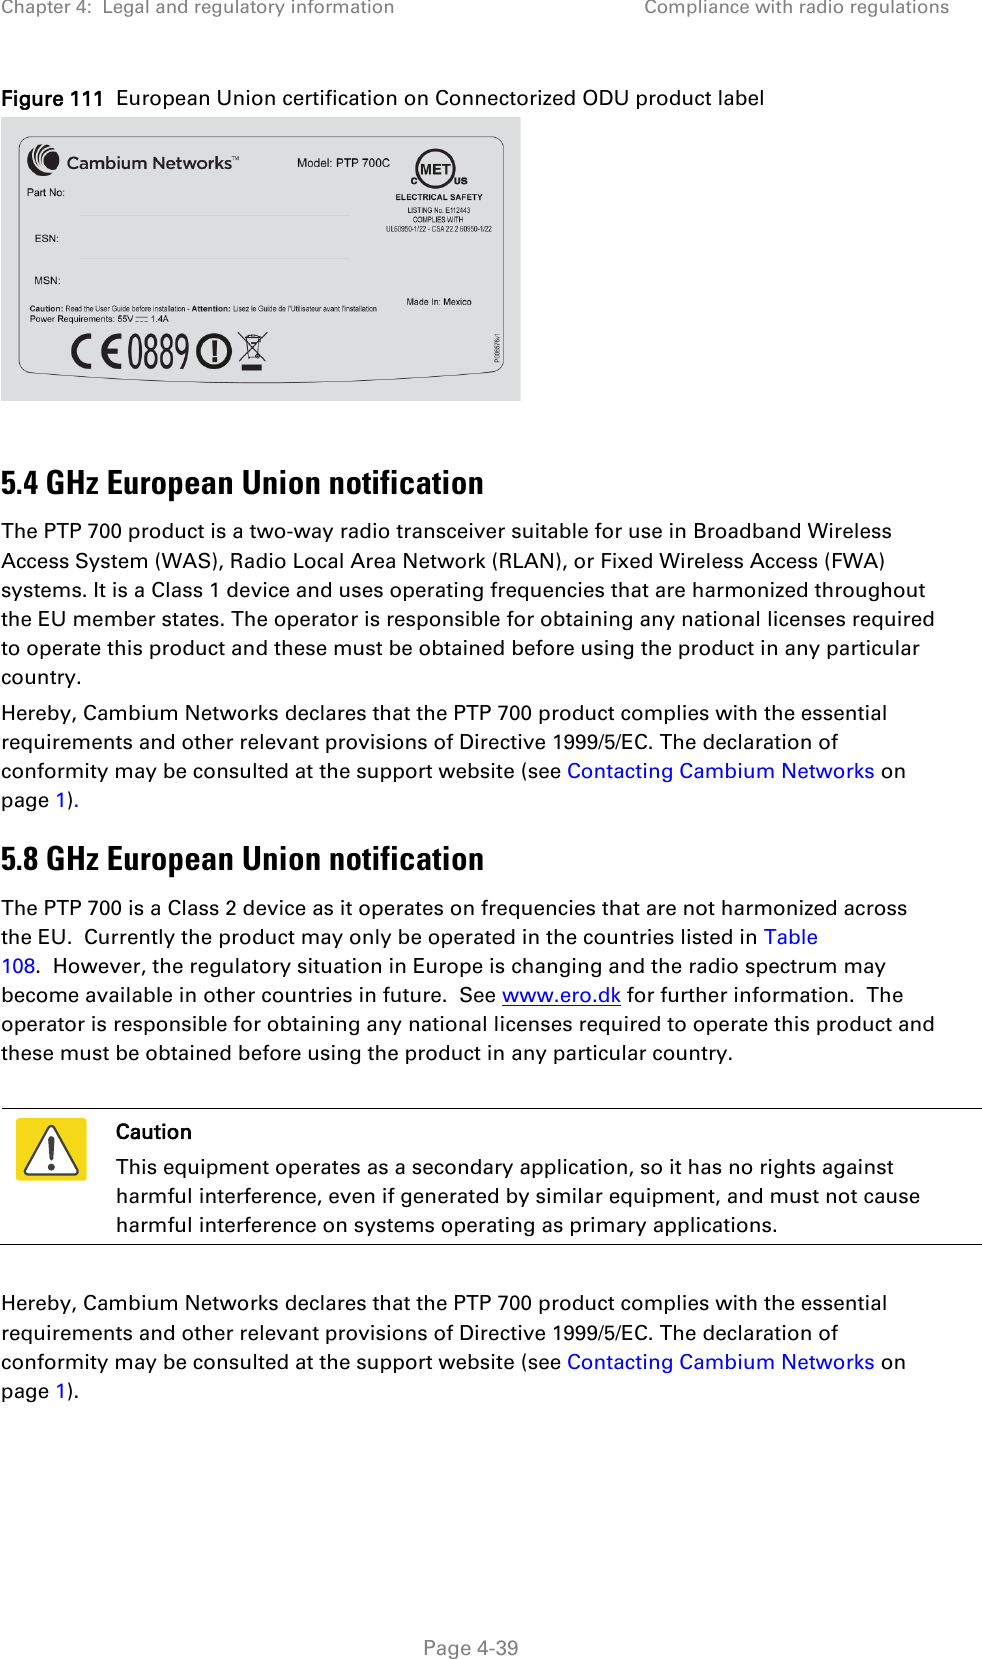 Chapter 4:  Legal and regulatory information Compliance with radio regulations  Figure 111  European Union certification on Connectorized ODU product label   5.4 GHz European Union notification The PTP 700 product is a two-way radio transceiver suitable for use in Broadband Wireless Access System (WAS), Radio Local Area Network (RLAN), or Fixed Wireless Access (FWA) systems. It is a Class 1 device and uses operating frequencies that are harmonized throughout the EU member states. The operator is responsible for obtaining any national licenses required to operate this product and these must be obtained before using the product in any particular country. Hereby, Cambium Networks declares that the PTP 700 product complies with the essential requirements and other relevant provisions of Directive 1999/5/EC. The declaration of conformity may be consulted at the support website (see Contacting Cambium Networks on page 1).  5.8 GHz European Union notification The PTP 700 is a Class 2 device as it operates on frequencies that are not harmonized across the EU.  Currently the product may only be operated in the countries listed in Table 108.  However, the regulatory situation in Europe is changing and the radio spectrum may become available in other countries in future.  See www.ero.dk for further information.  The operator is responsible for obtaining any national licenses required to operate this product and these must be obtained before using the product in any particular country.   Caution This equipment operates as a secondary application, so it has no rights against harmful interference, even if generated by similar equipment, and must not cause harmful interference on systems operating as primary applications.  Hereby, Cambium Networks declares that the PTP 700 product complies with the essential requirements and other relevant provisions of Directive 1999/5/EC. The declaration of conformity may be consulted at the support website (see Contacting Cambium Networks on page 1).  Page 4-39 